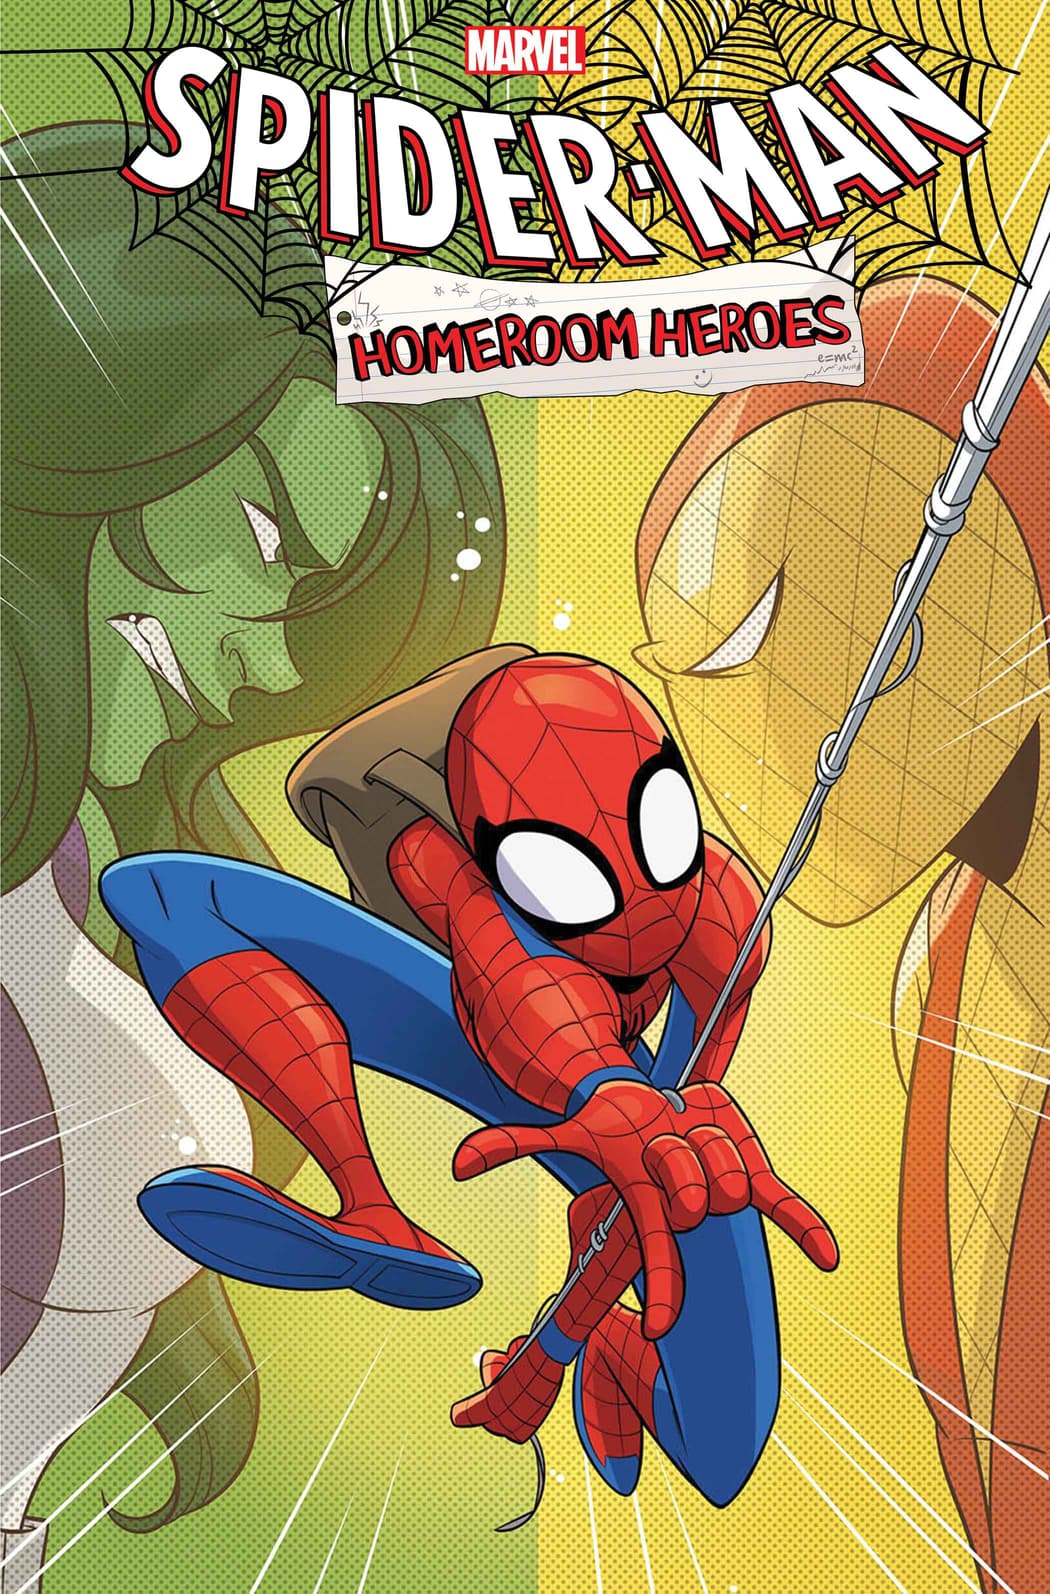 SPIDER-MAN: HOMEROOM HEROES #1 cover by Arianna Florean